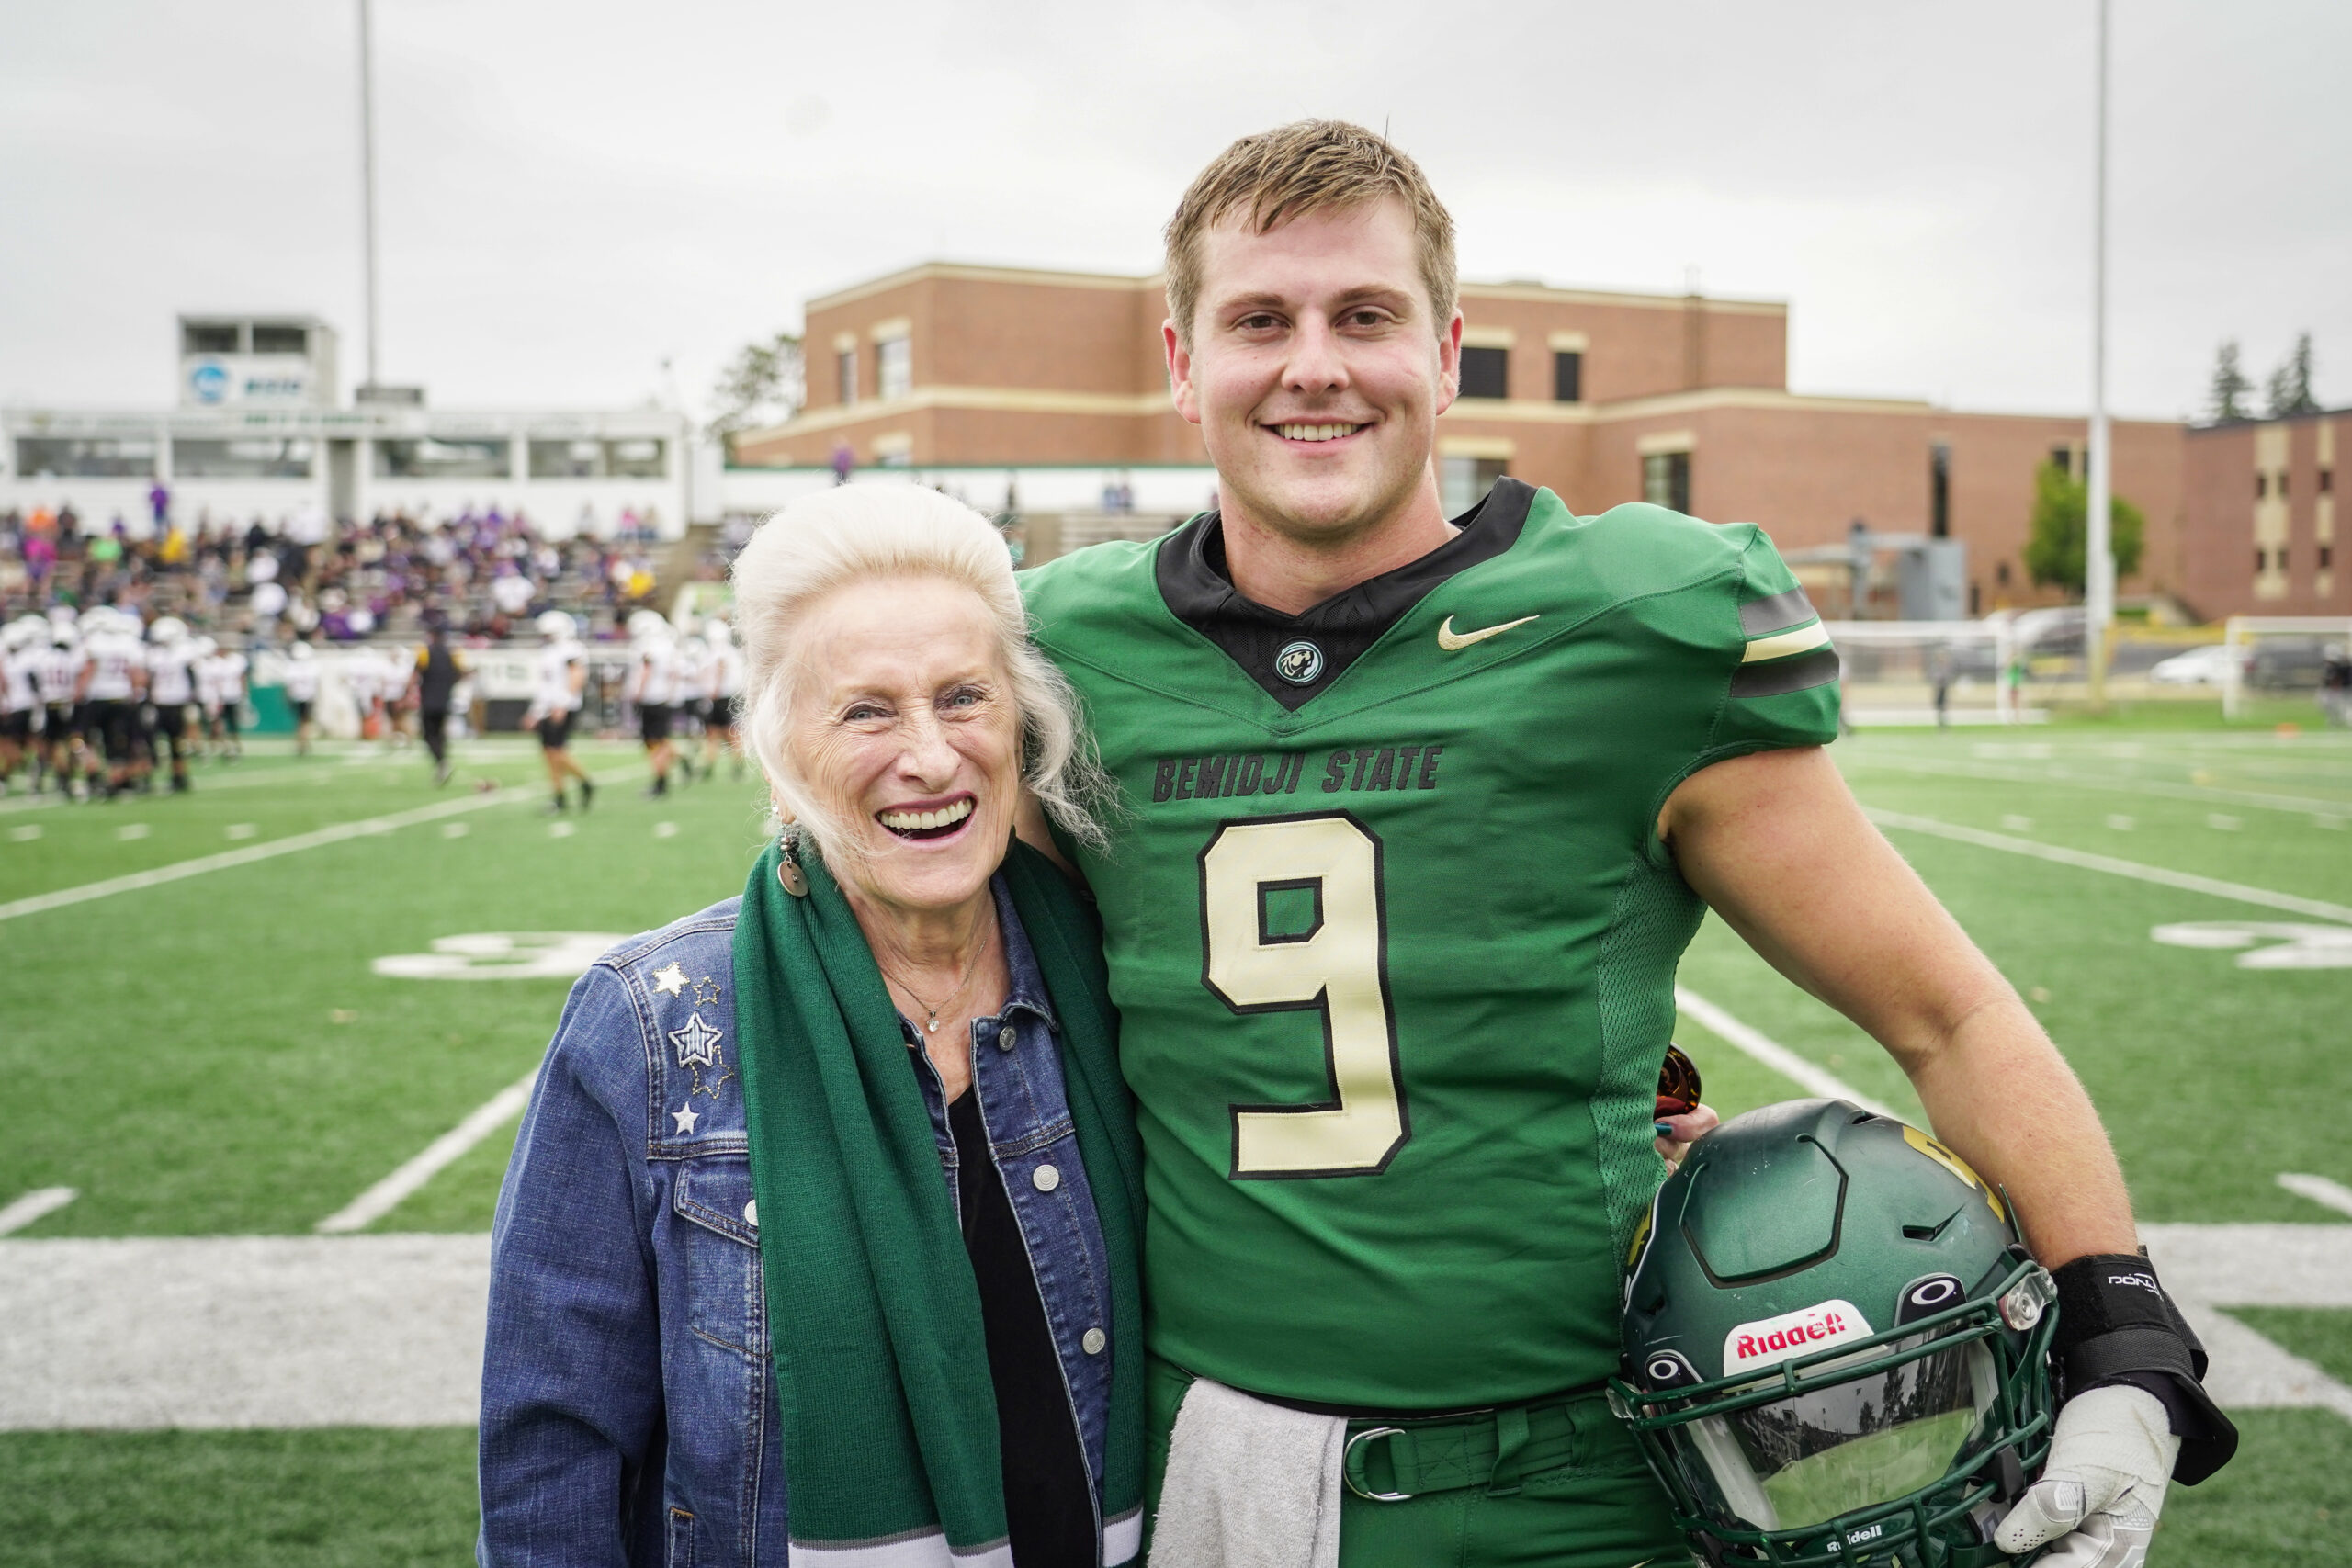 Margaret Laurich, left, with Bemidji State linebacker Spencer Wehr, her scholarship recipient, before the Homecoming football game against Minnesota State on Saturday, Sept. 30, 2023, at Chet Anderson Stadium. (Micah Friez / Bemidji State)